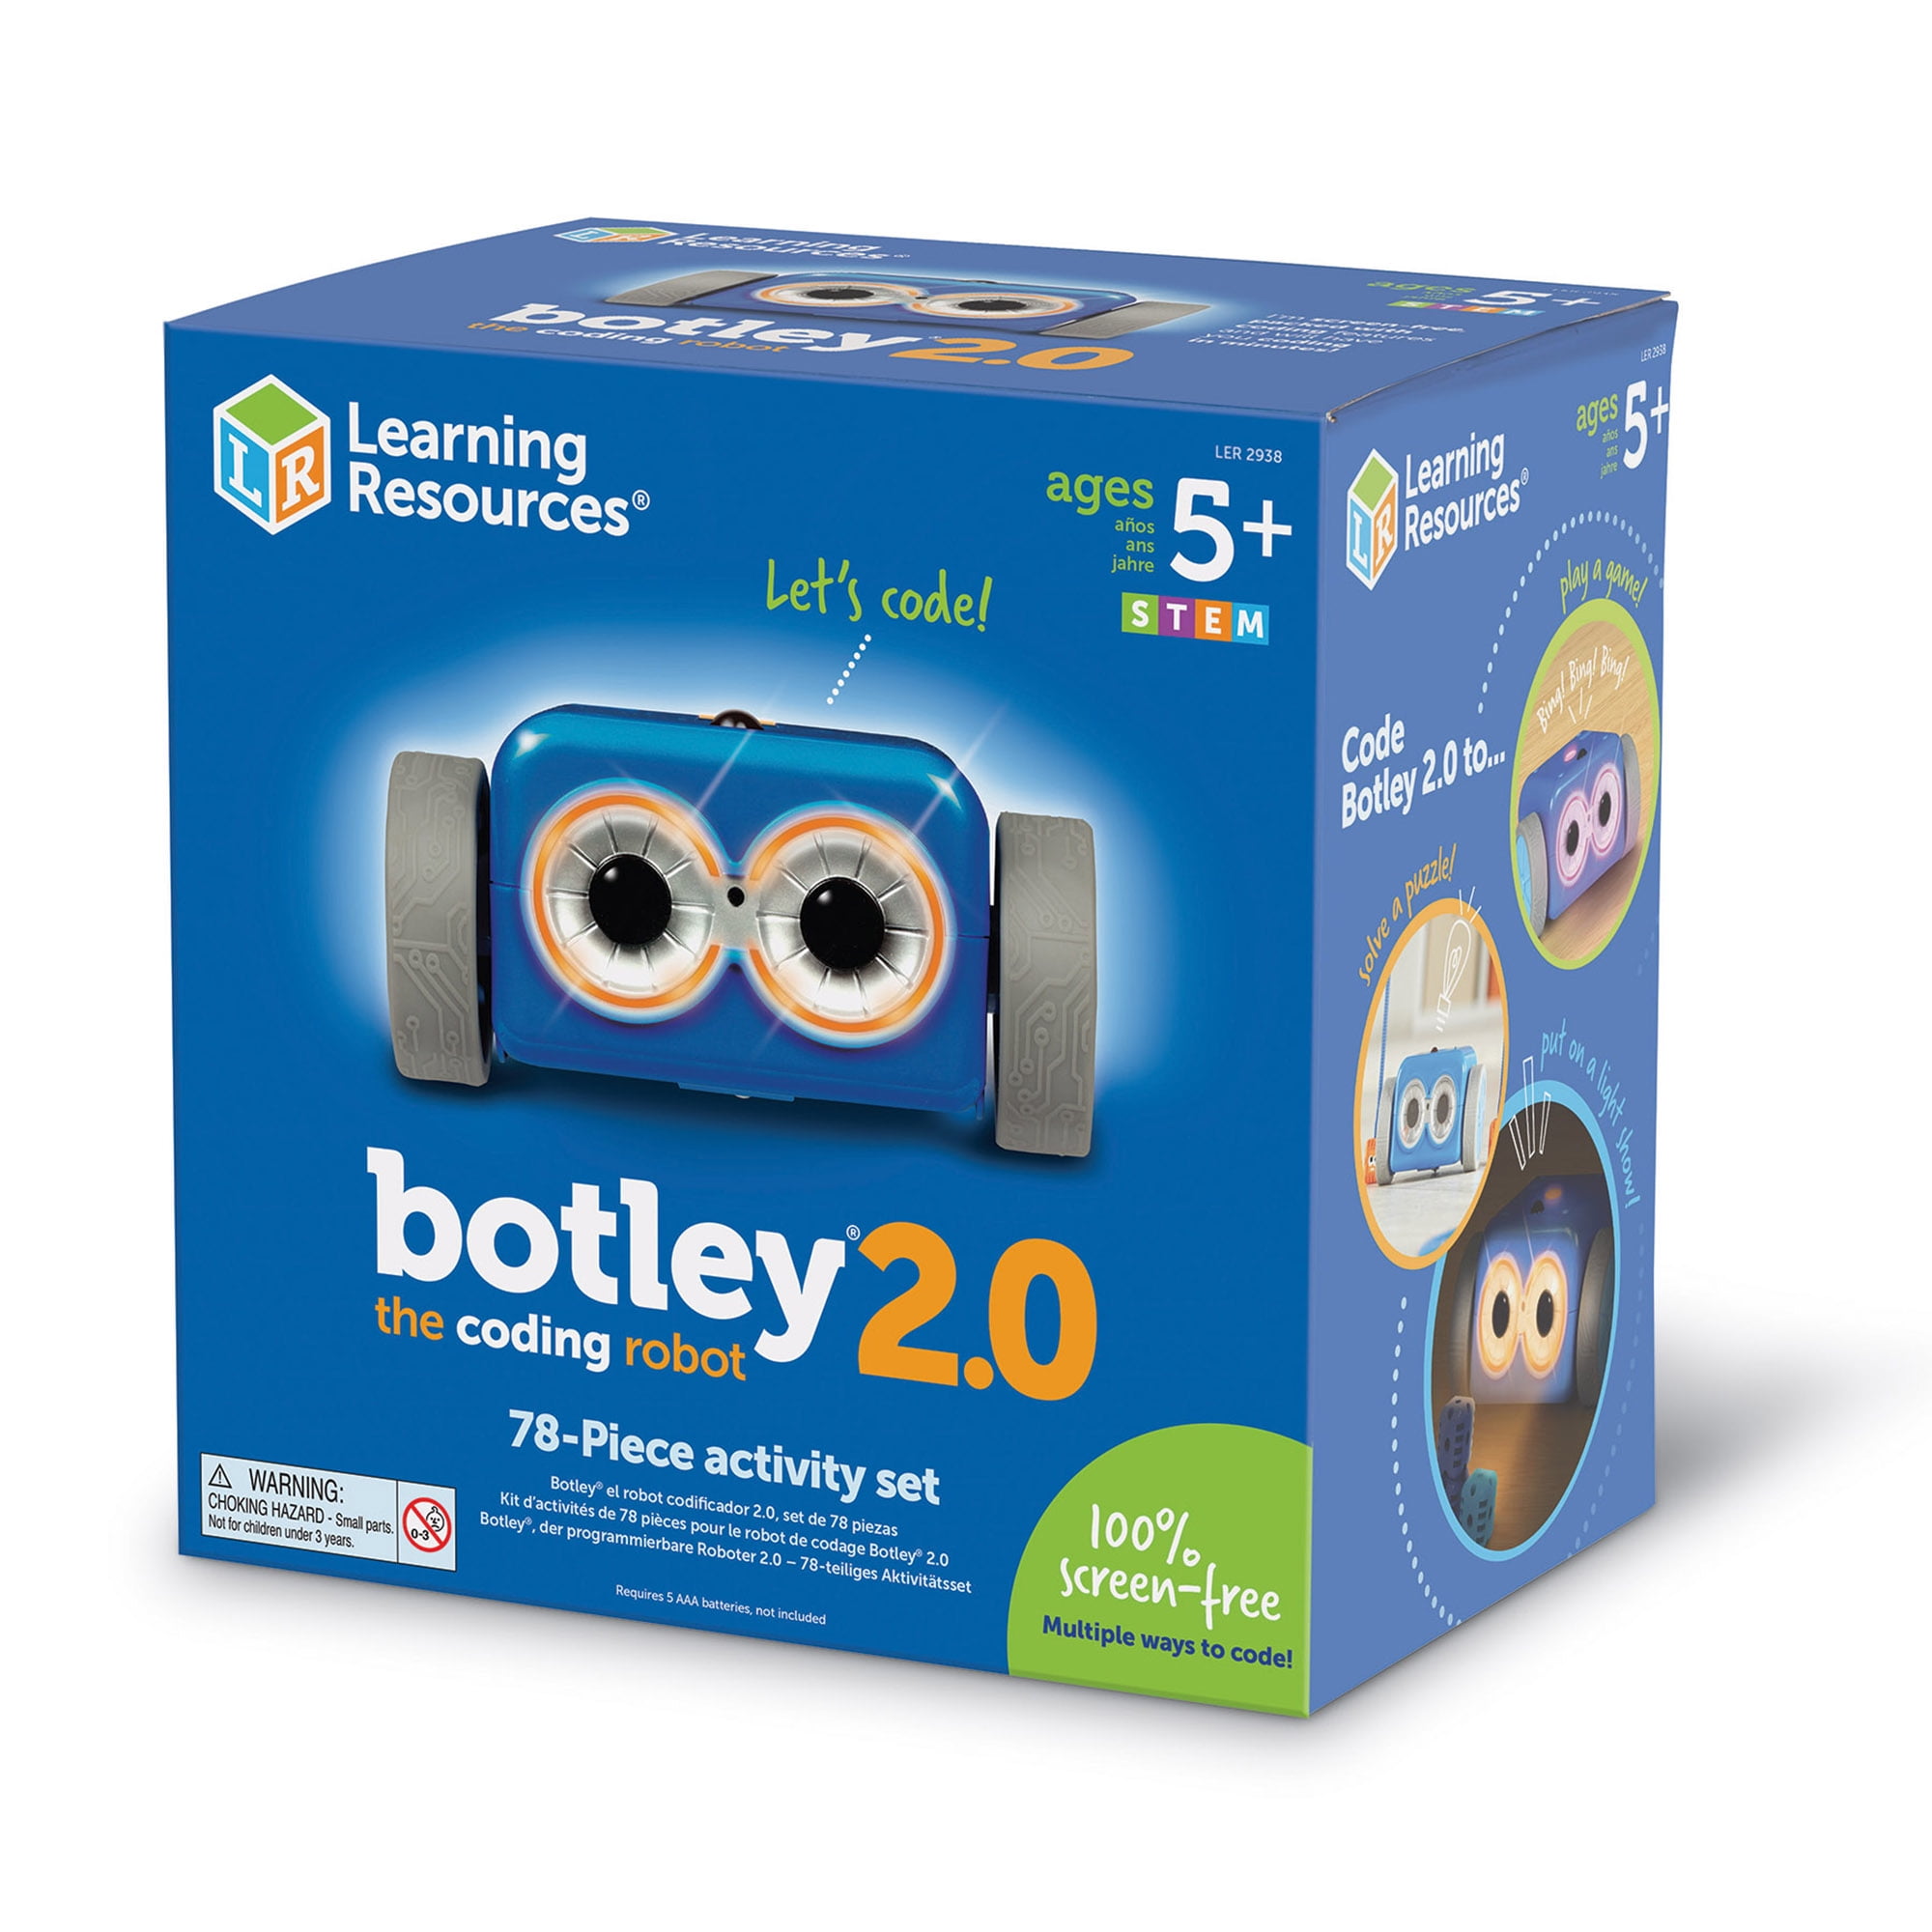 Botley The Coding Robot Facemask 4-Pack - LER2953, Learning Resources